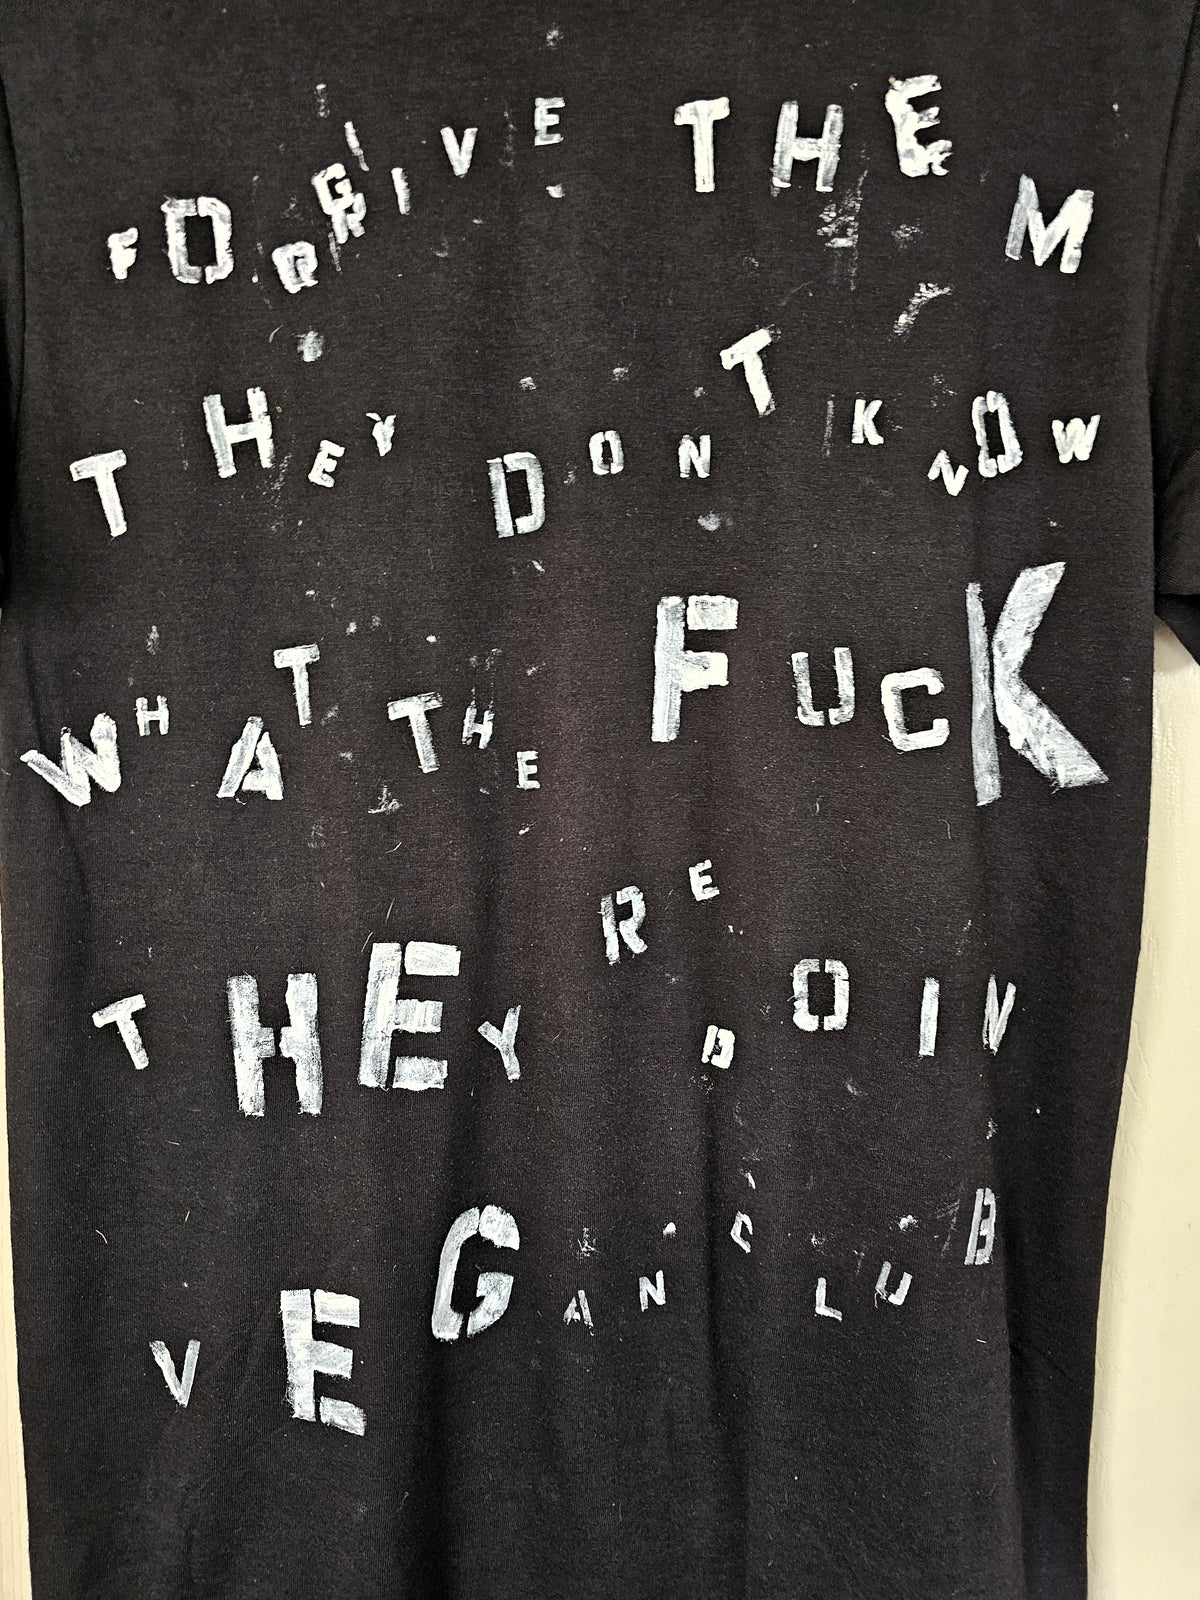 Forgive them; for they do not know what the fuck they are doing Vegan Club t-shirt